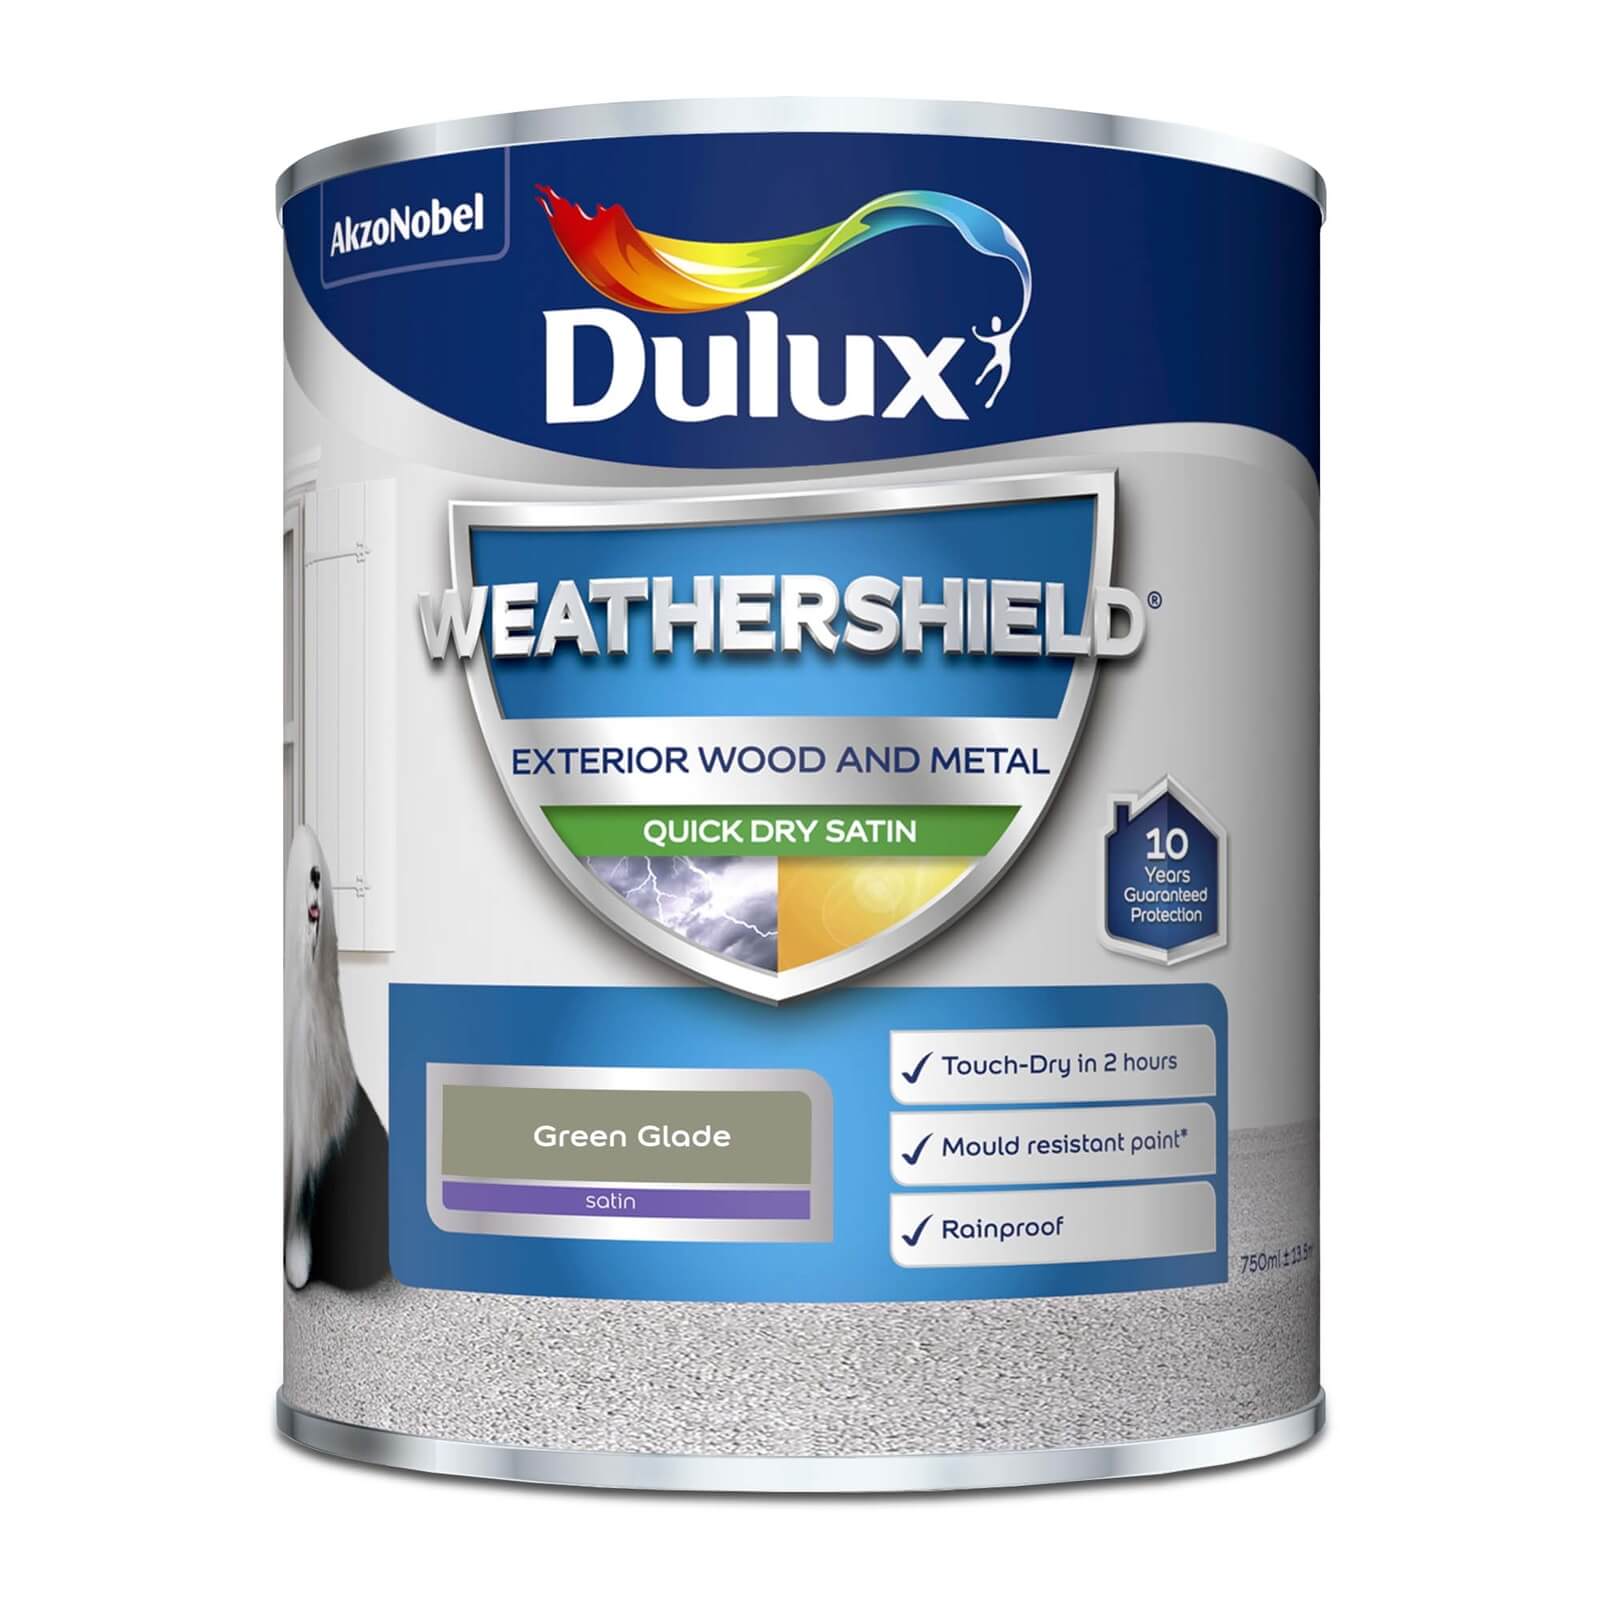 Dulux Weathershield Exterior Quick Dry Satin Paint Green Glade - 750ml